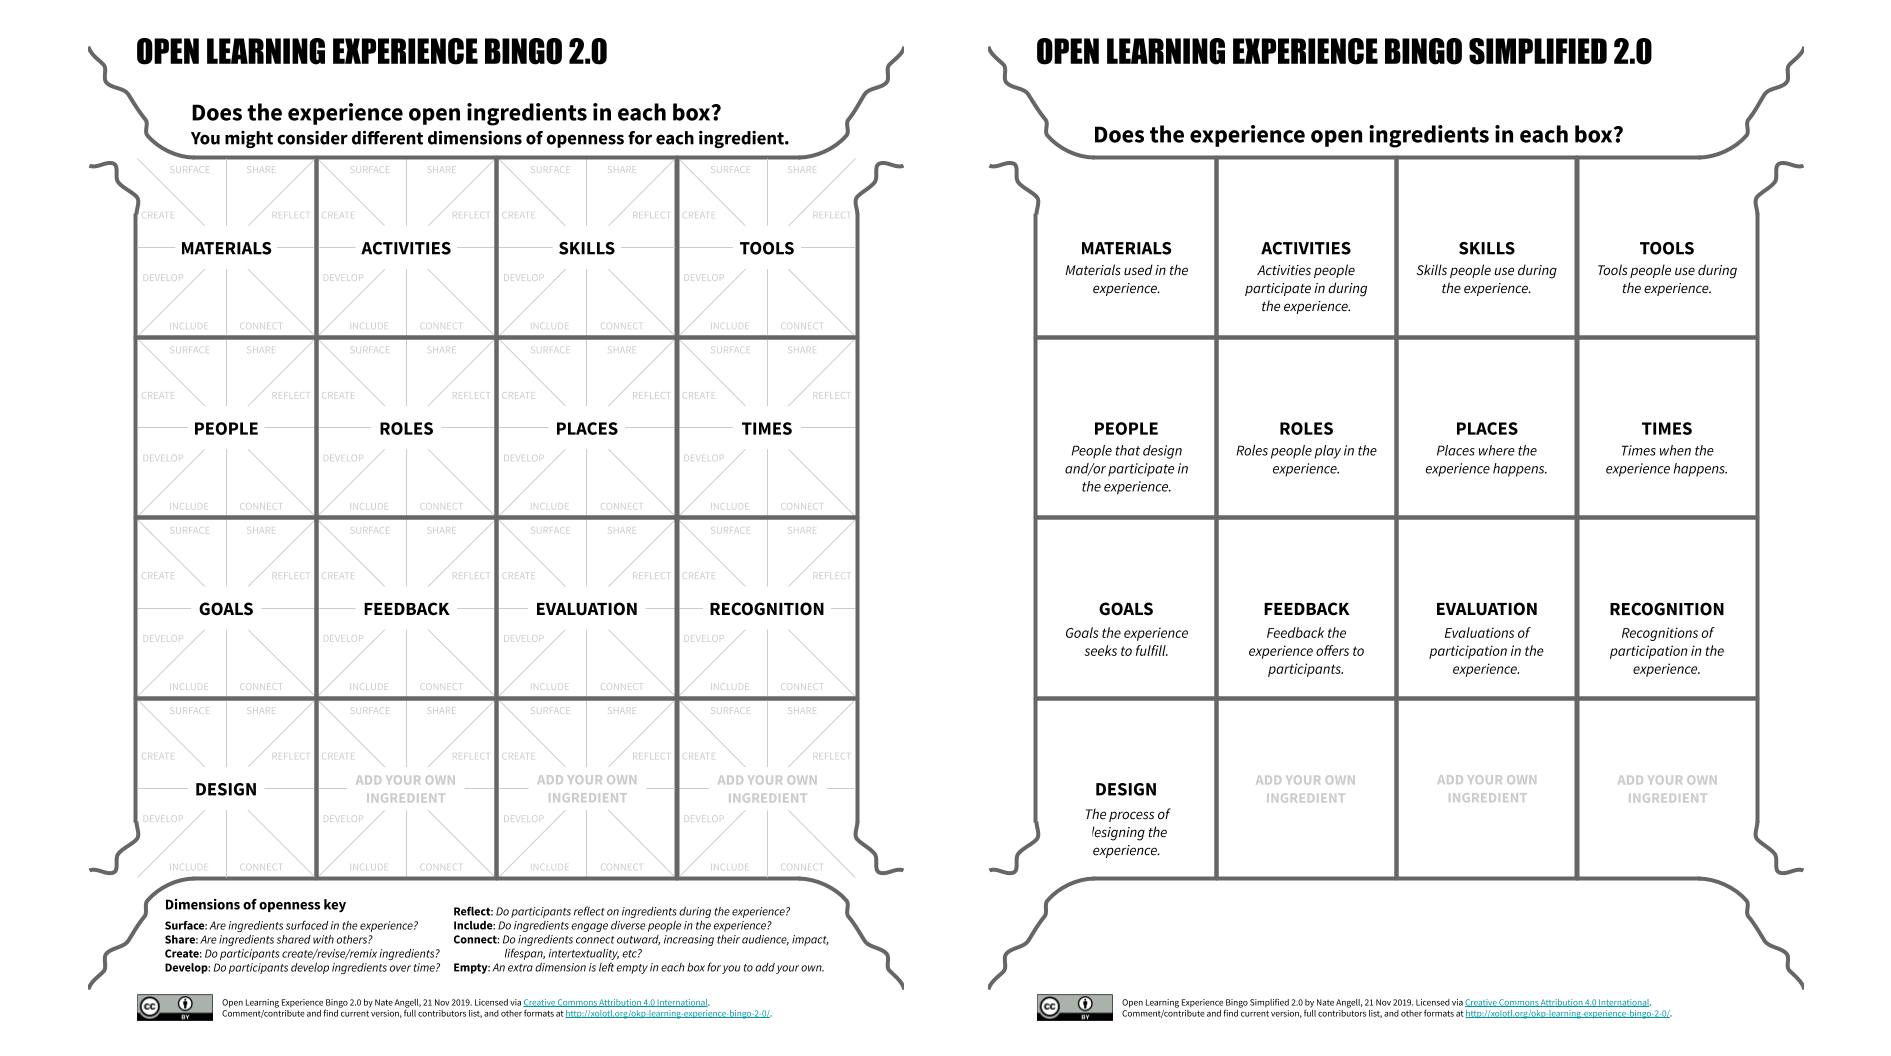 Screenshot of a bingo card for open learning experience design side-by-side with a simplified version of it, accessible at: https://xolotl.org/okp-learning-experience-bingo-2-0/